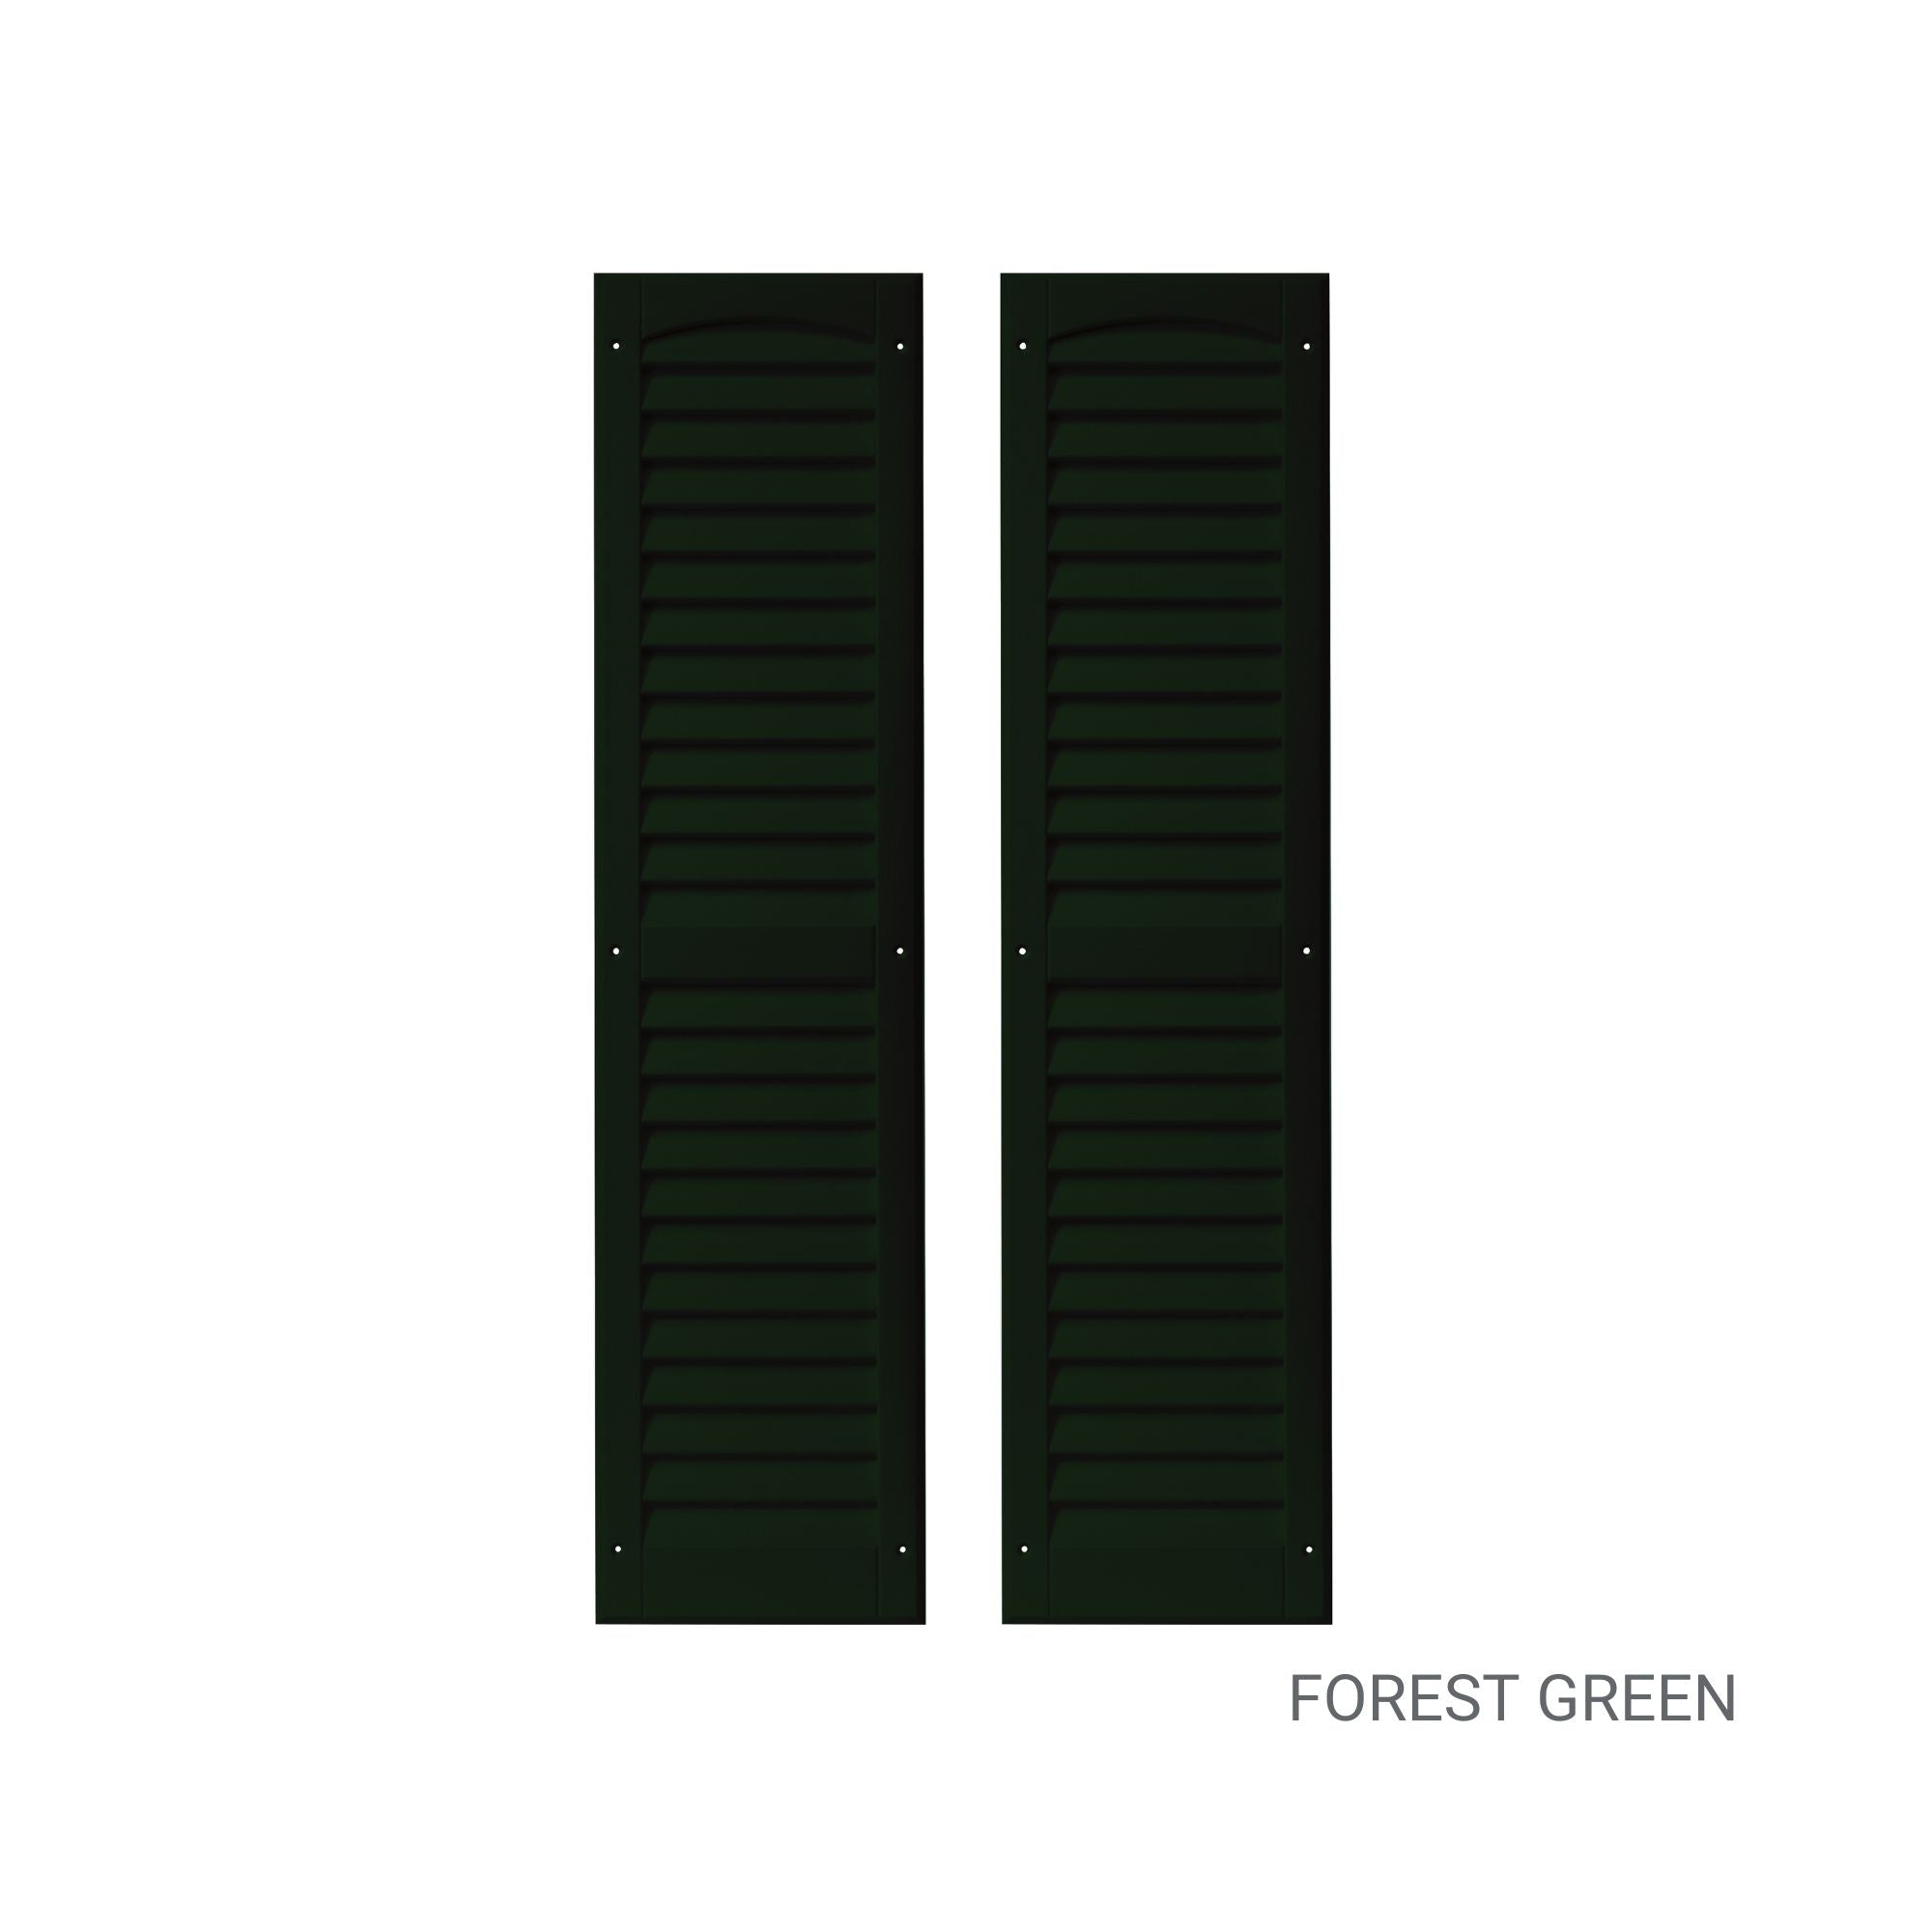 Pair of 9" W x 36" H Louvered Forest Green Shutters for Sheds, Playhouses, and MORE